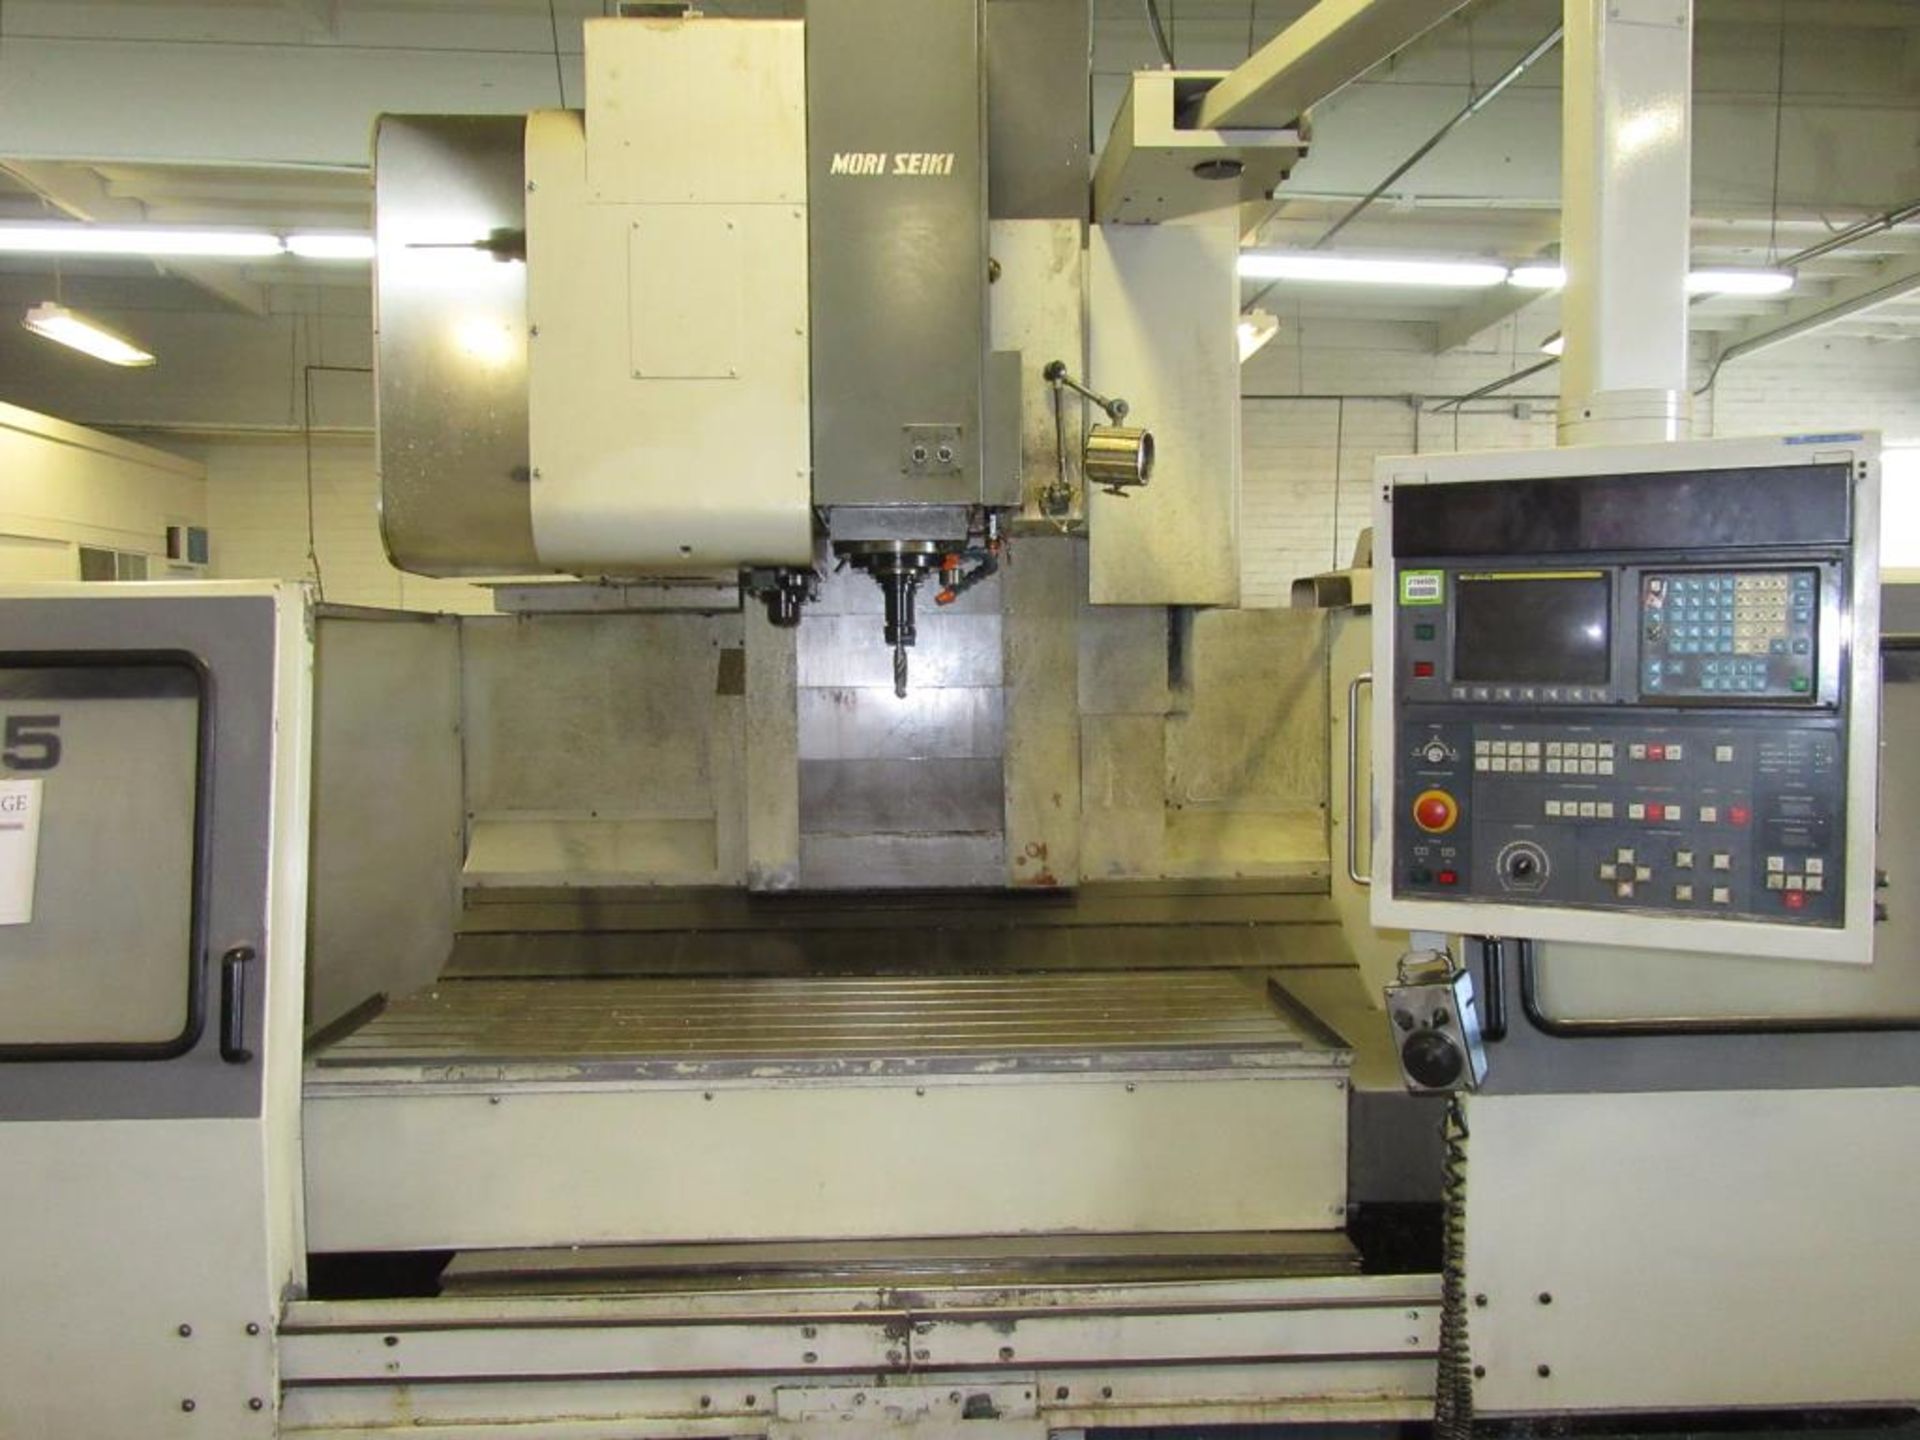 Mori Seiki MV-65/50 1992 - CNC Vertical Machining Center with MF-M4 3-Axis Control Panel, Table Size - Image 2 of 12